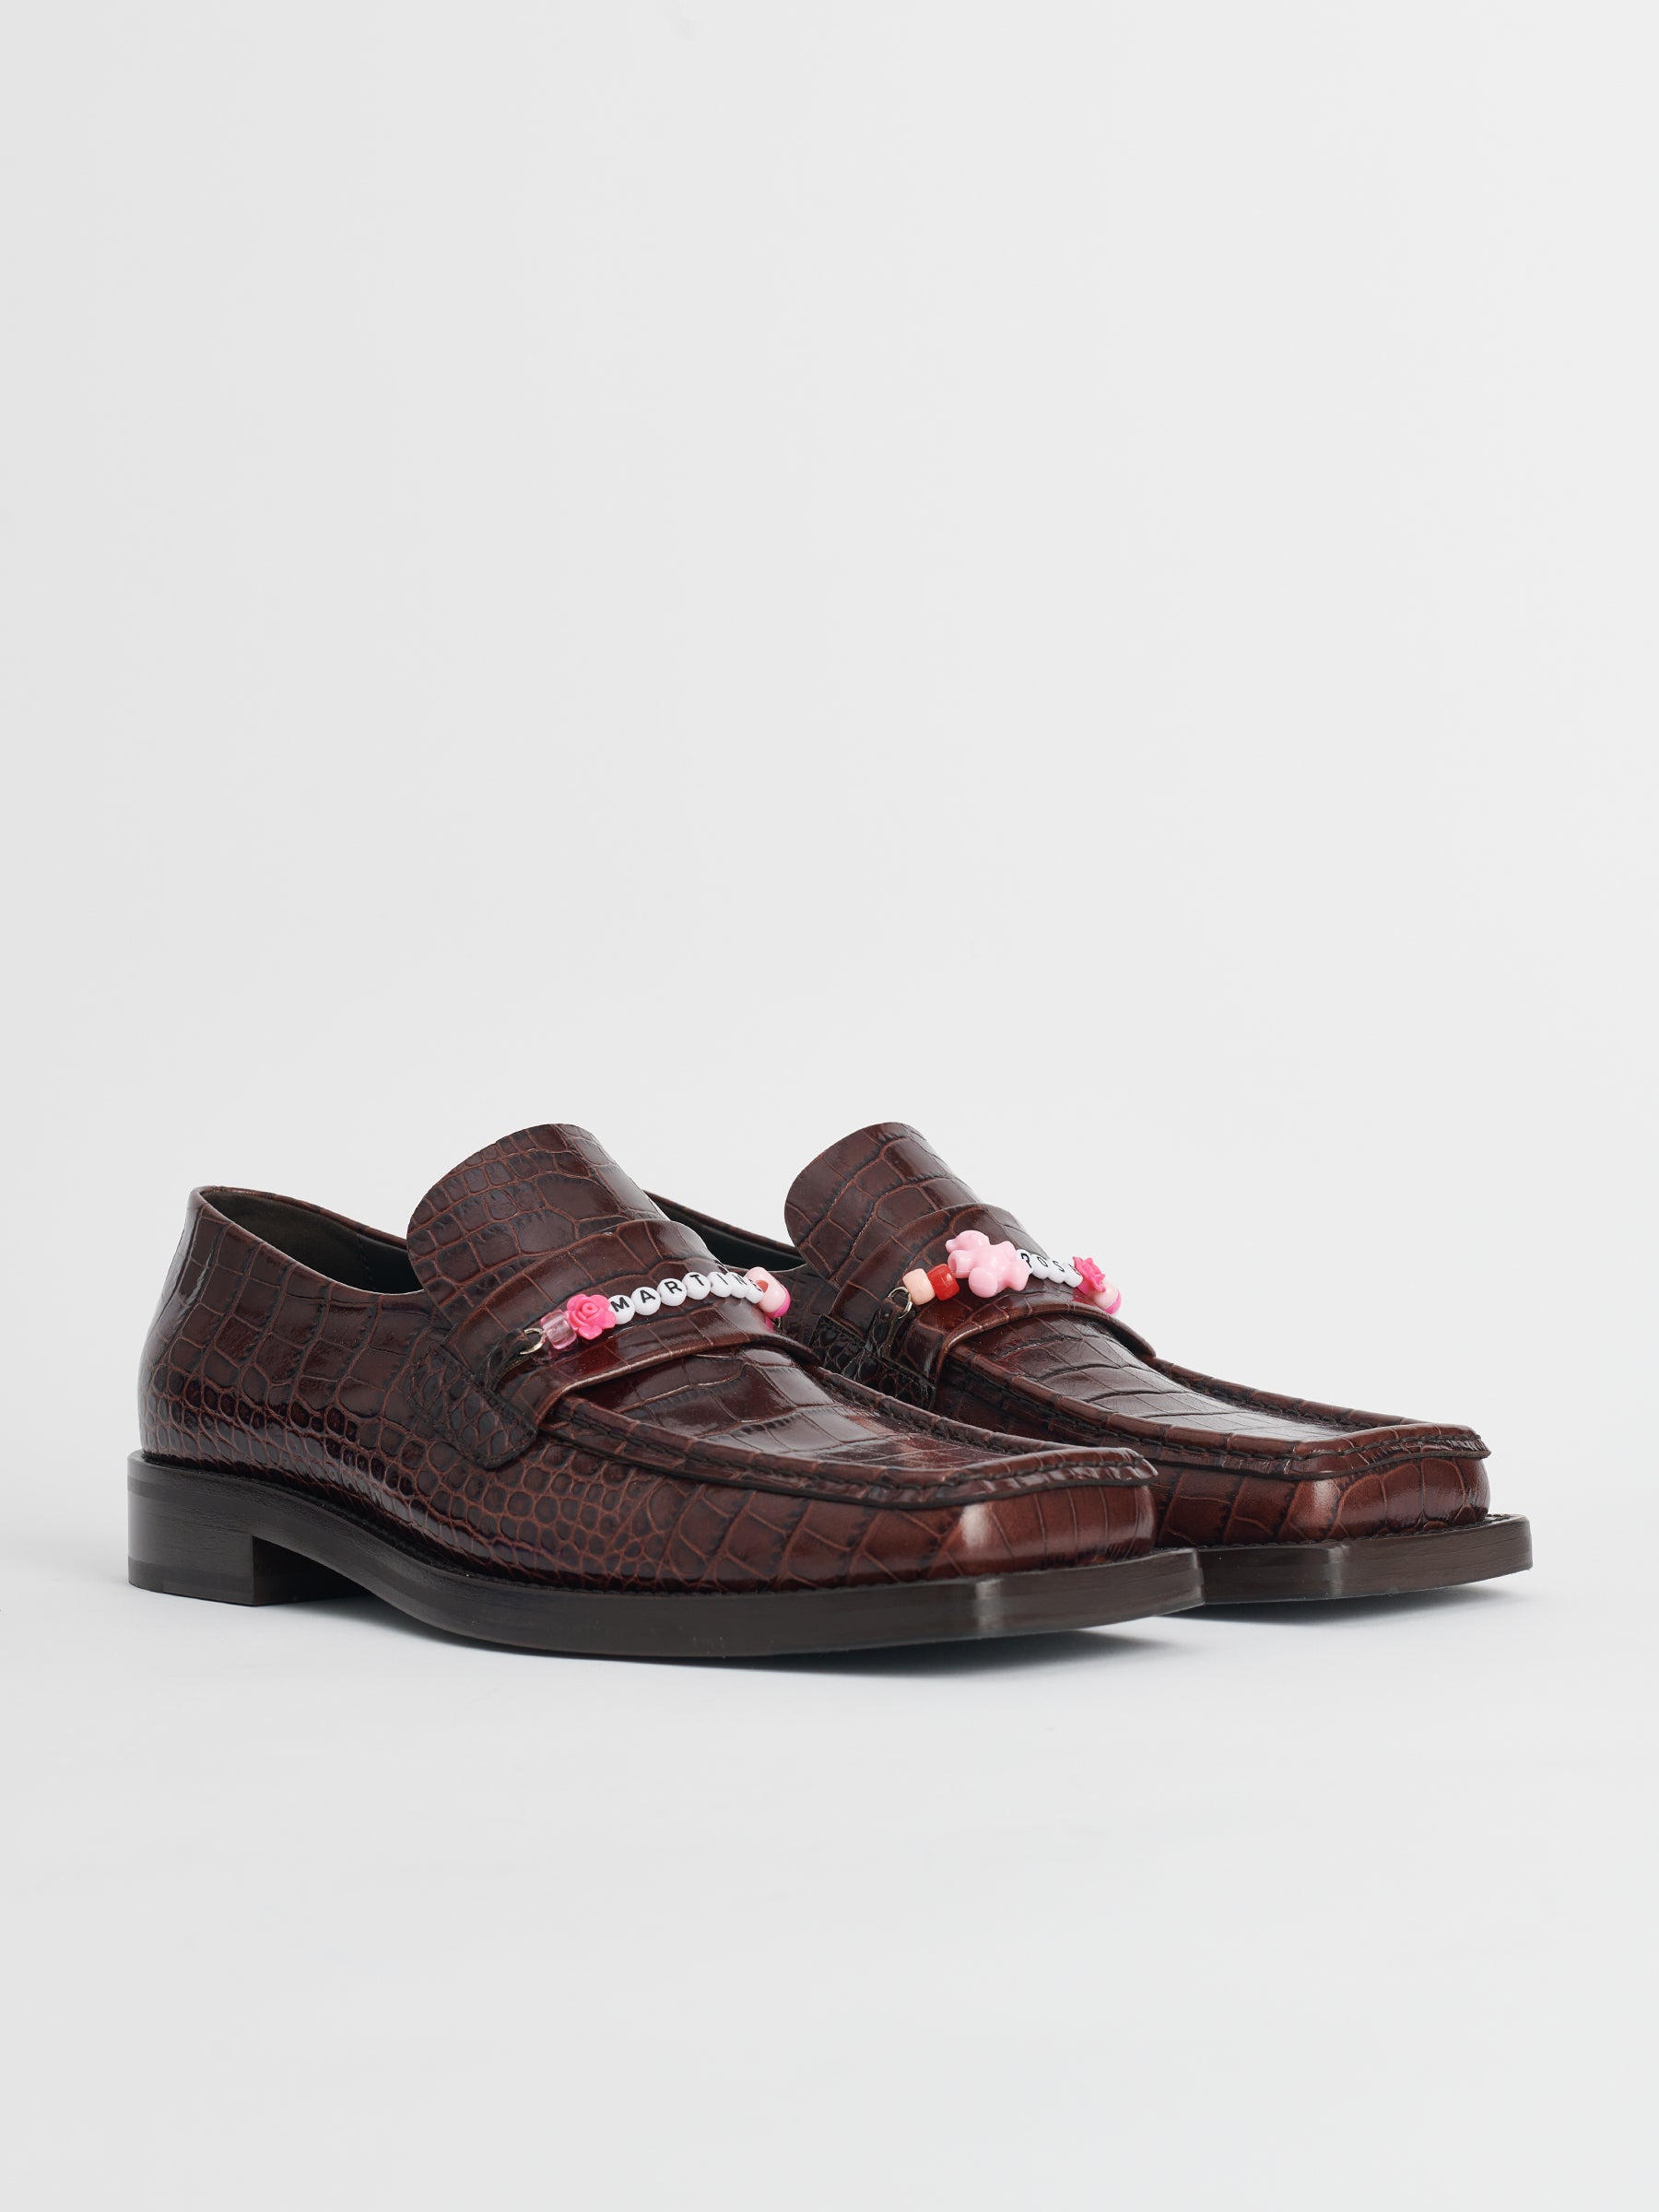 Martine Rose Beaded Square Toe Loafer Brown / Multi